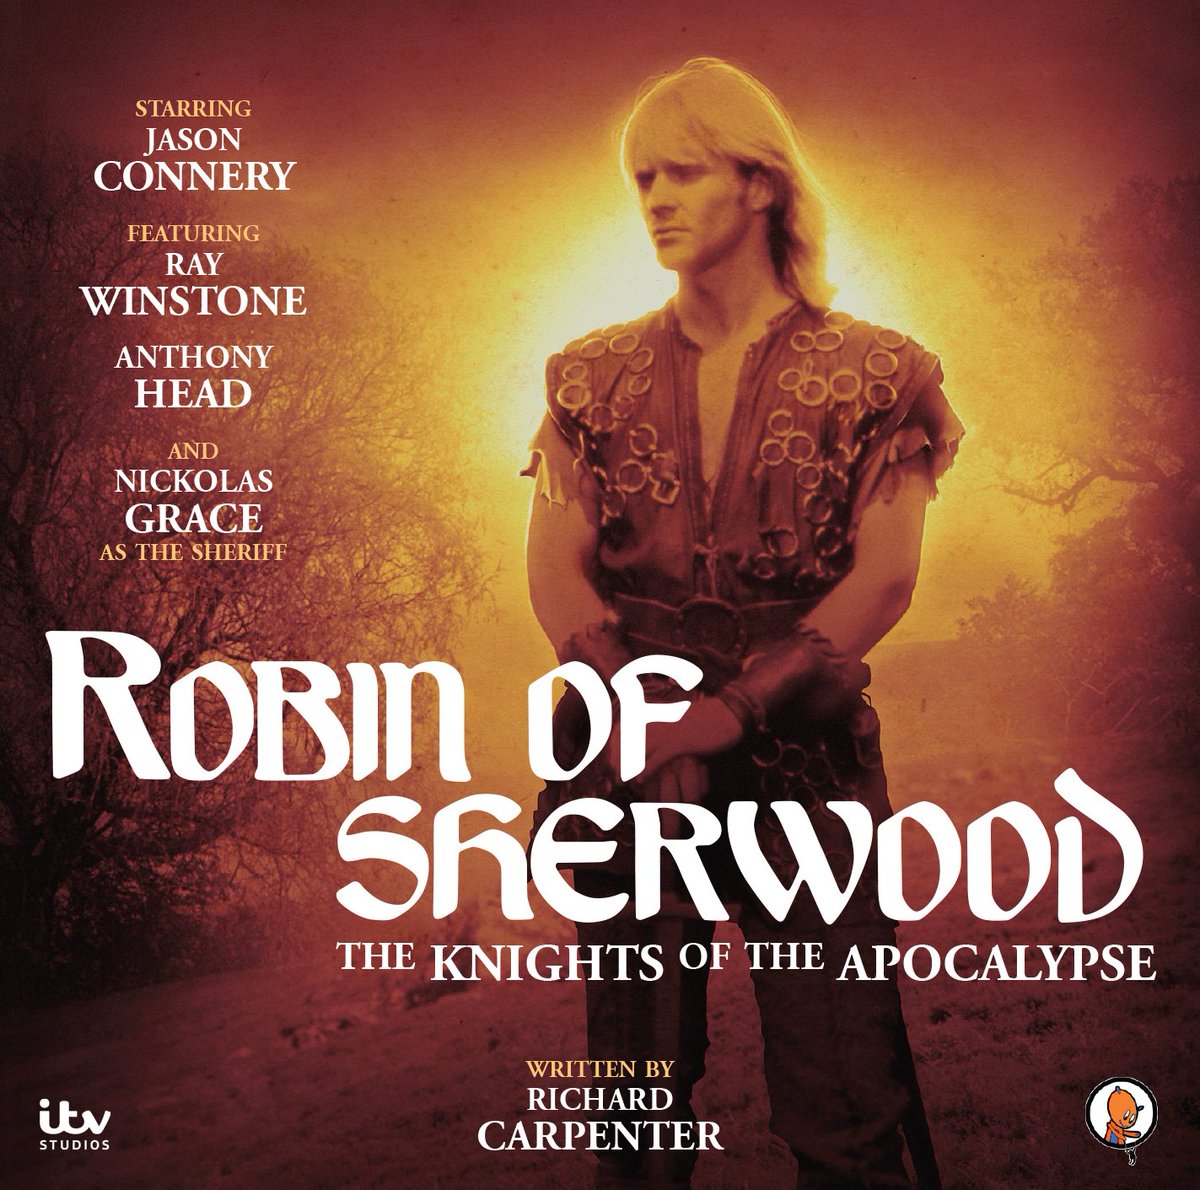 It's #WorldAudioDramaDay. Would you listen to Buffy the Vampire Slayer audio dramas? @JamesMarstersOf starred in a #Torchwood audio spinoff from @bigfinish . And @AnthonySHead was the master villain in #RobinofSherwood The Knights of Apocalypse from @SpitefulPuppet #Buffy #BTVS